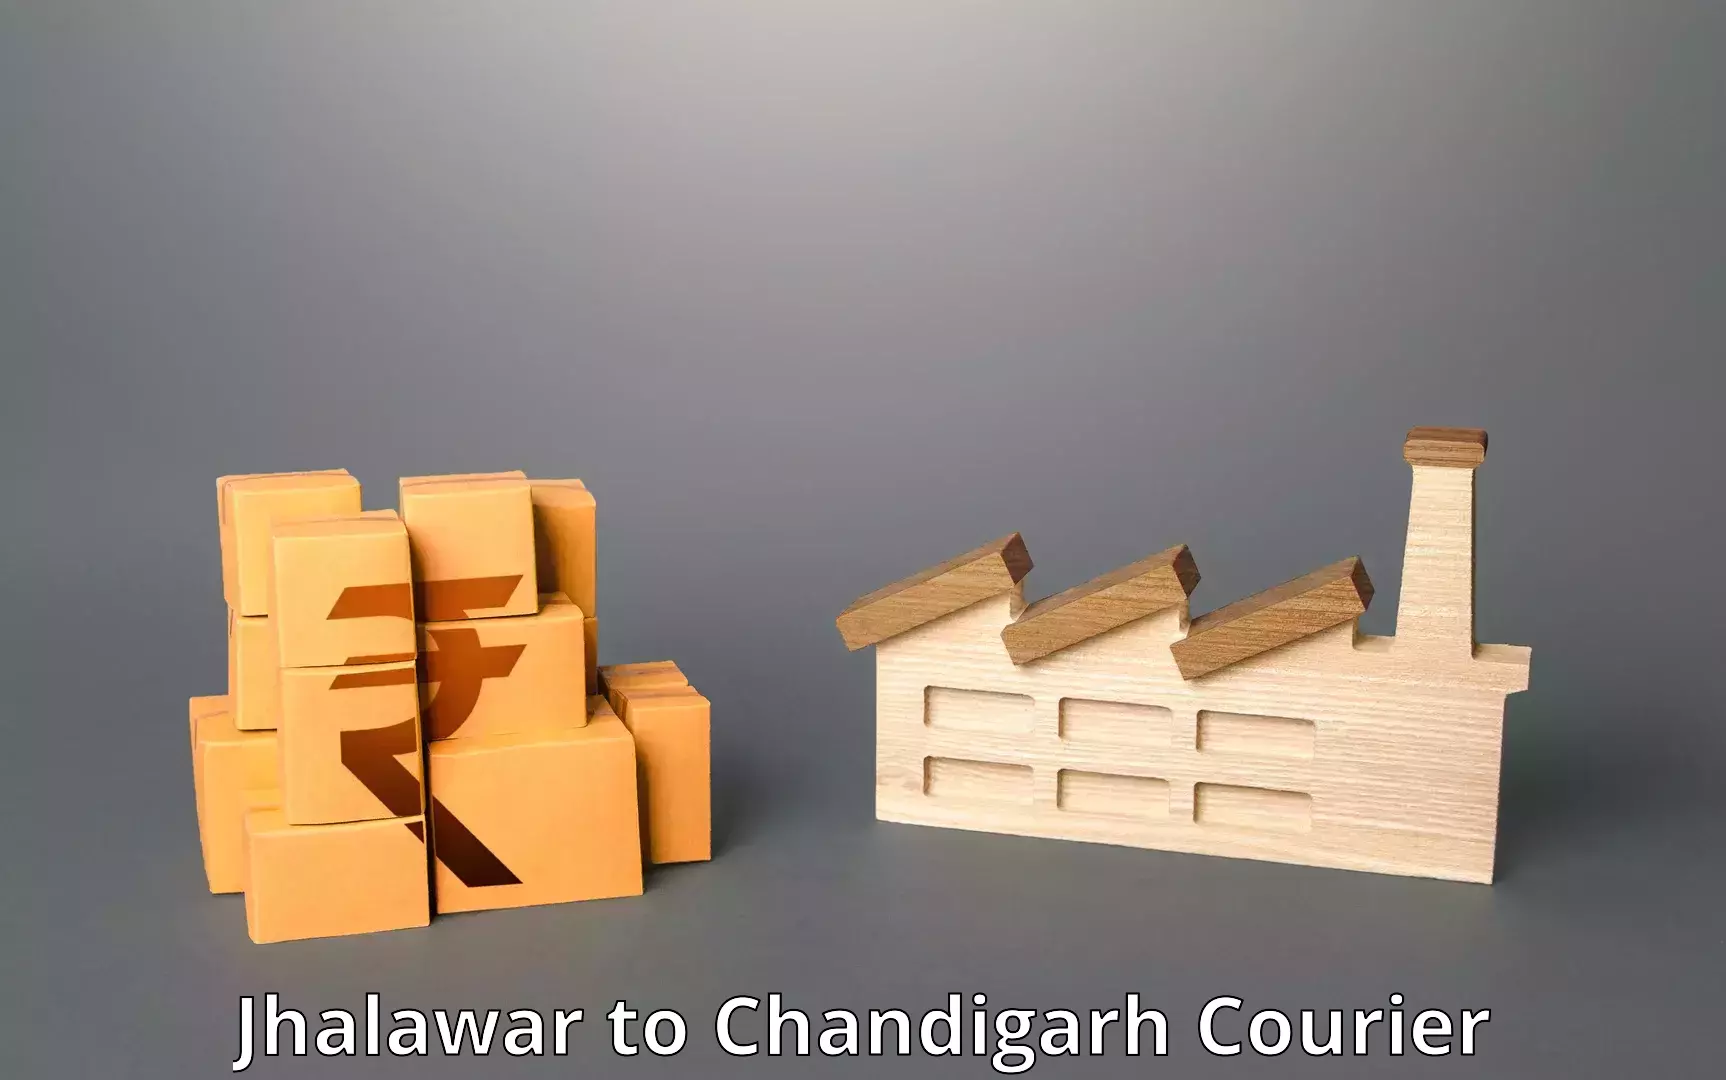 User-friendly delivery service Jhalawar to Chandigarh